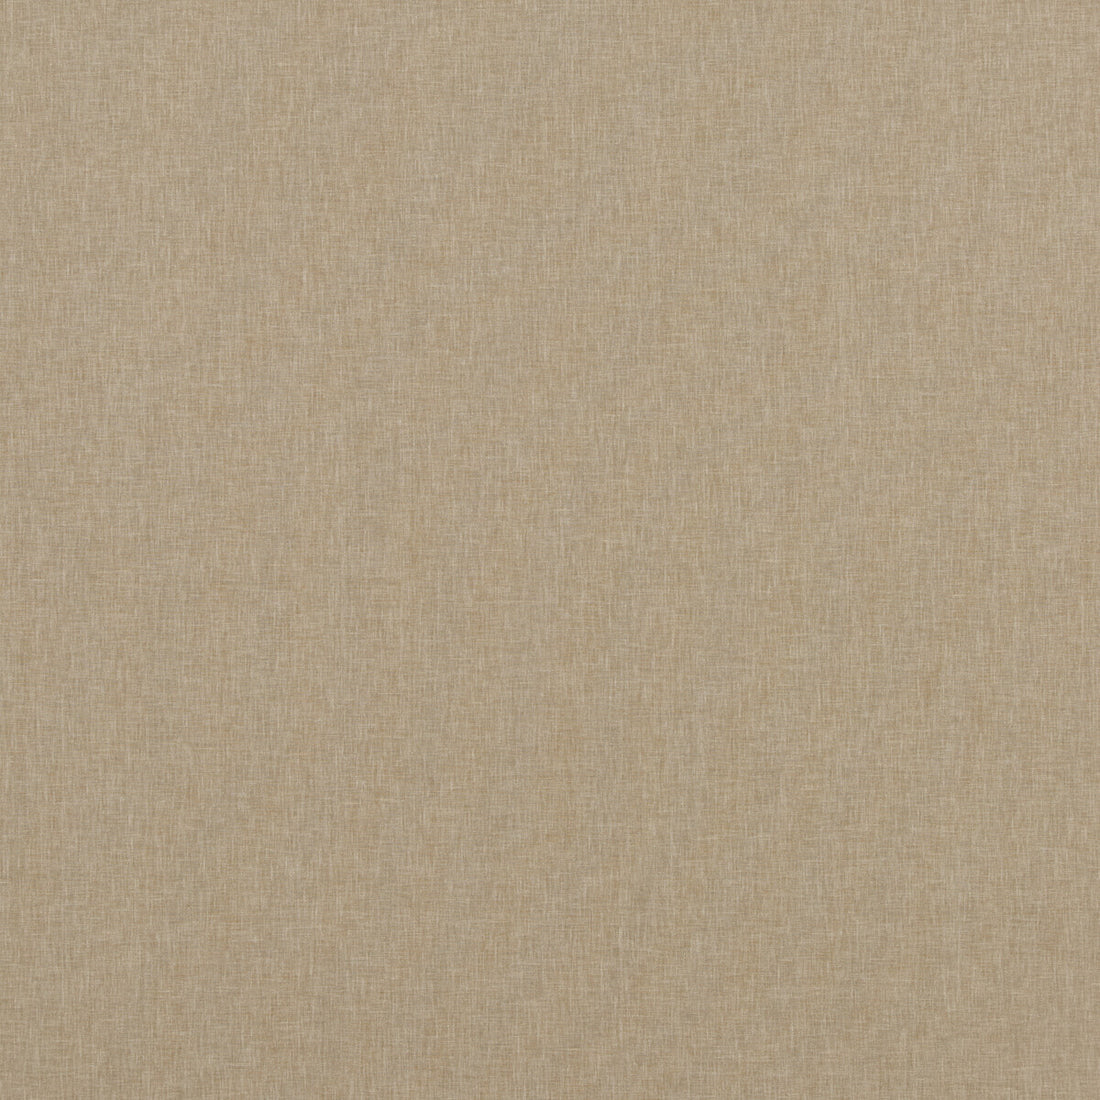 Carnival Plain fabric in hemp color - pattern PF50420.180.0 - by Baker Lifestyle in the Carnival collection